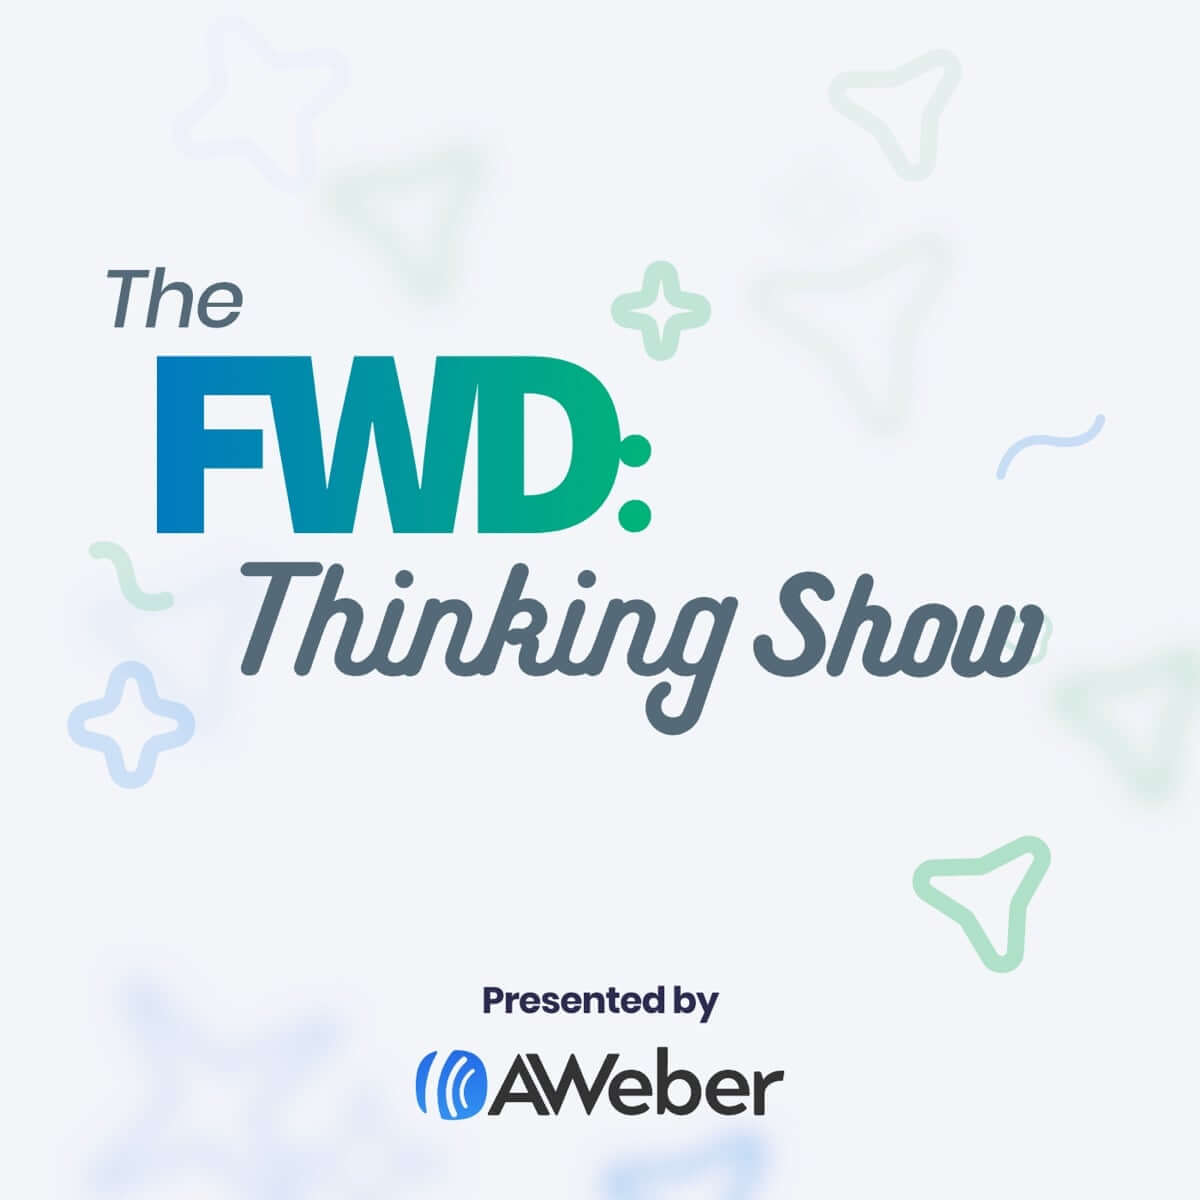 The FWD: Thinking Show by AWeber